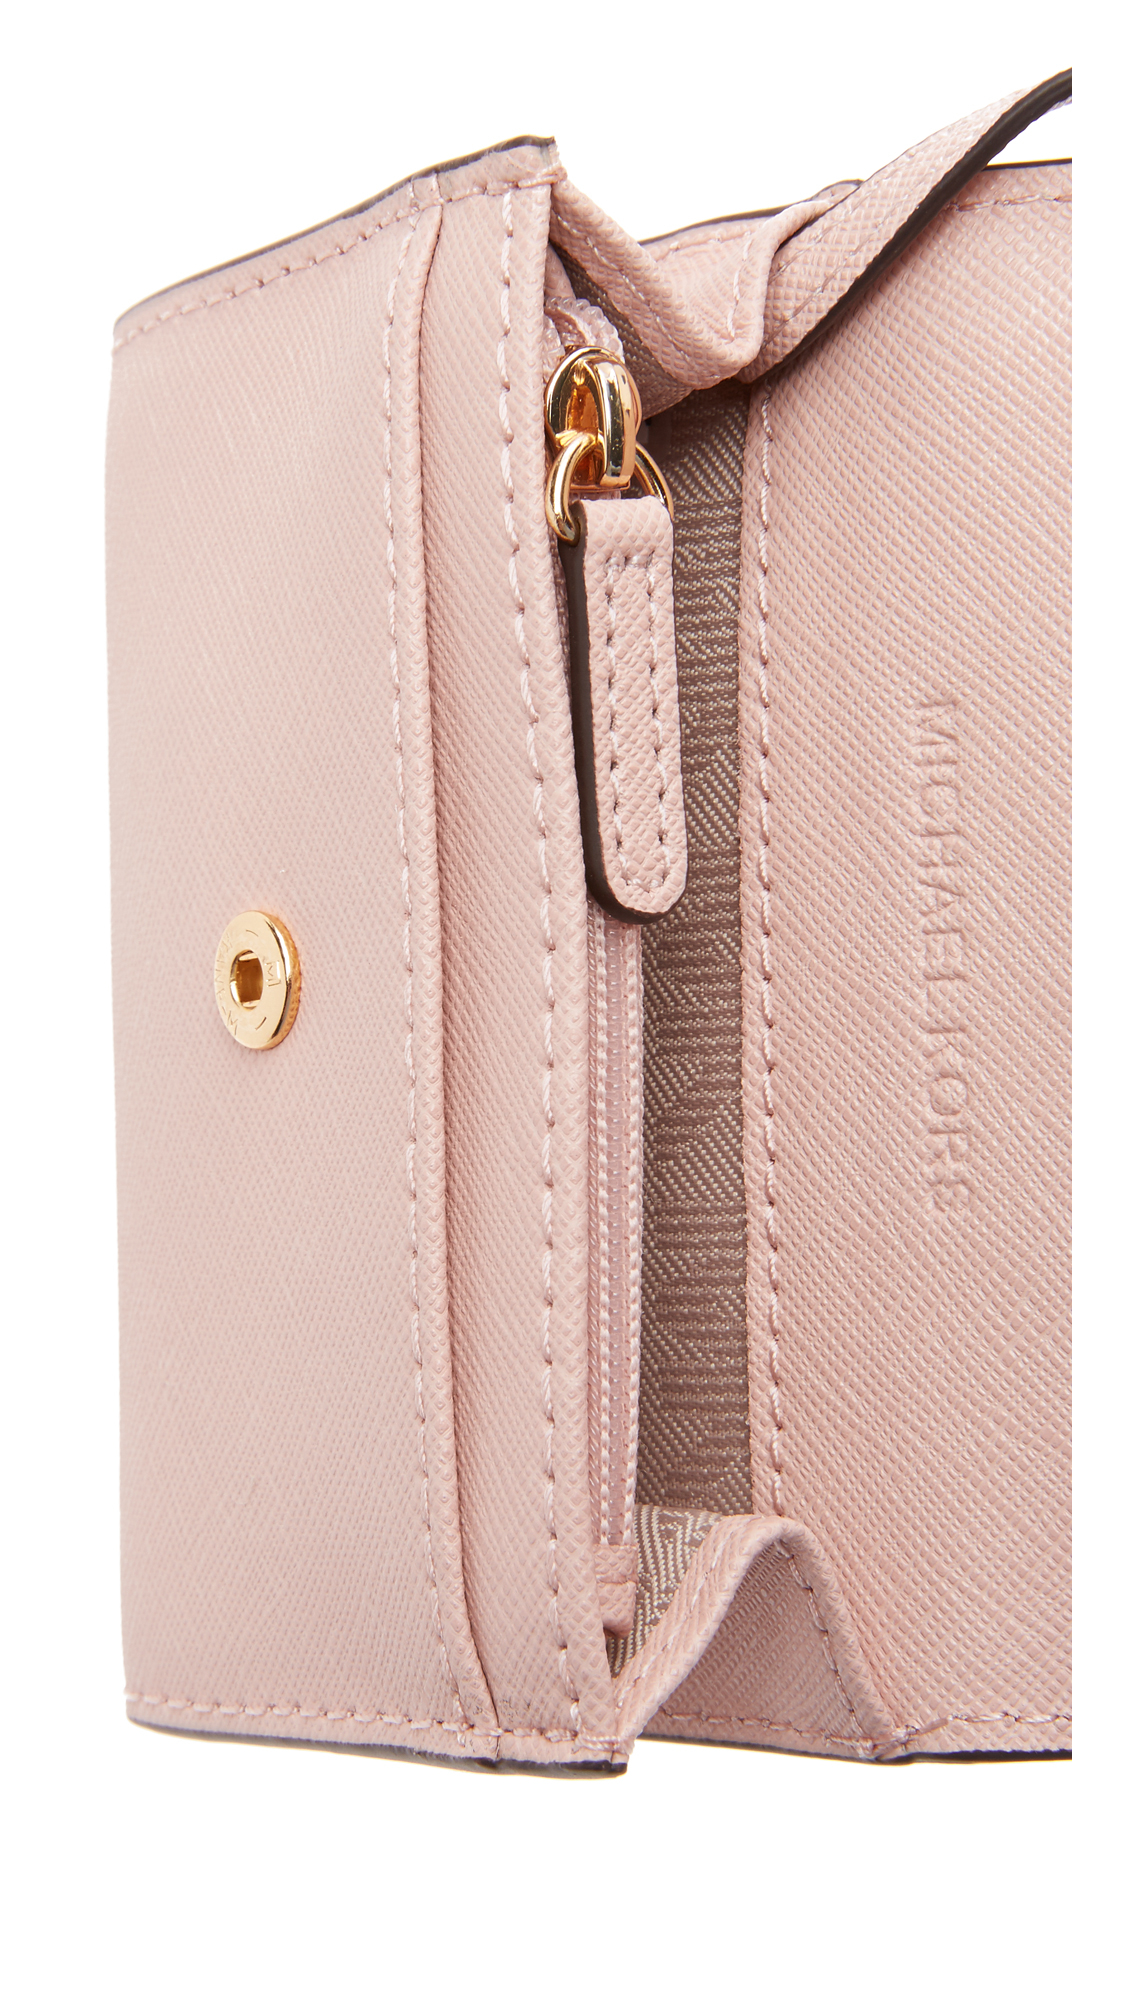 Lyst - Michael Michael Kors Jet Set Coin Purse in Pink